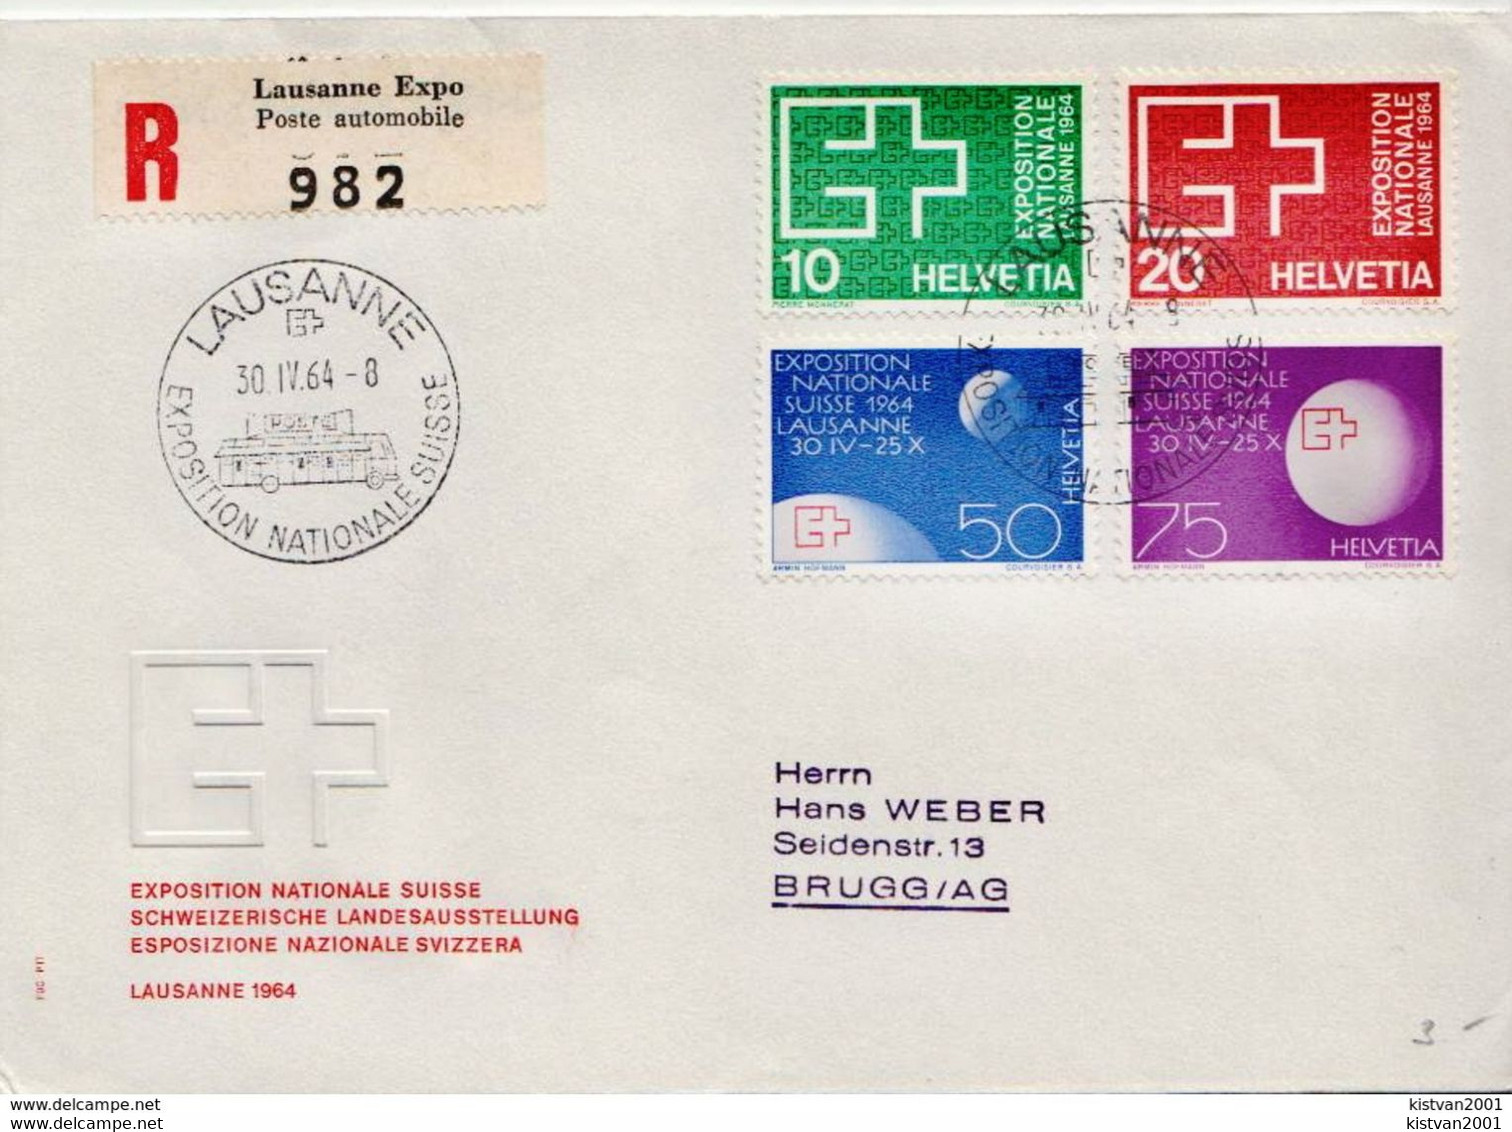 Postal history: Switzerland registered cover with Geneve Salon de l'Auto cancel 1988 and 18 more covers